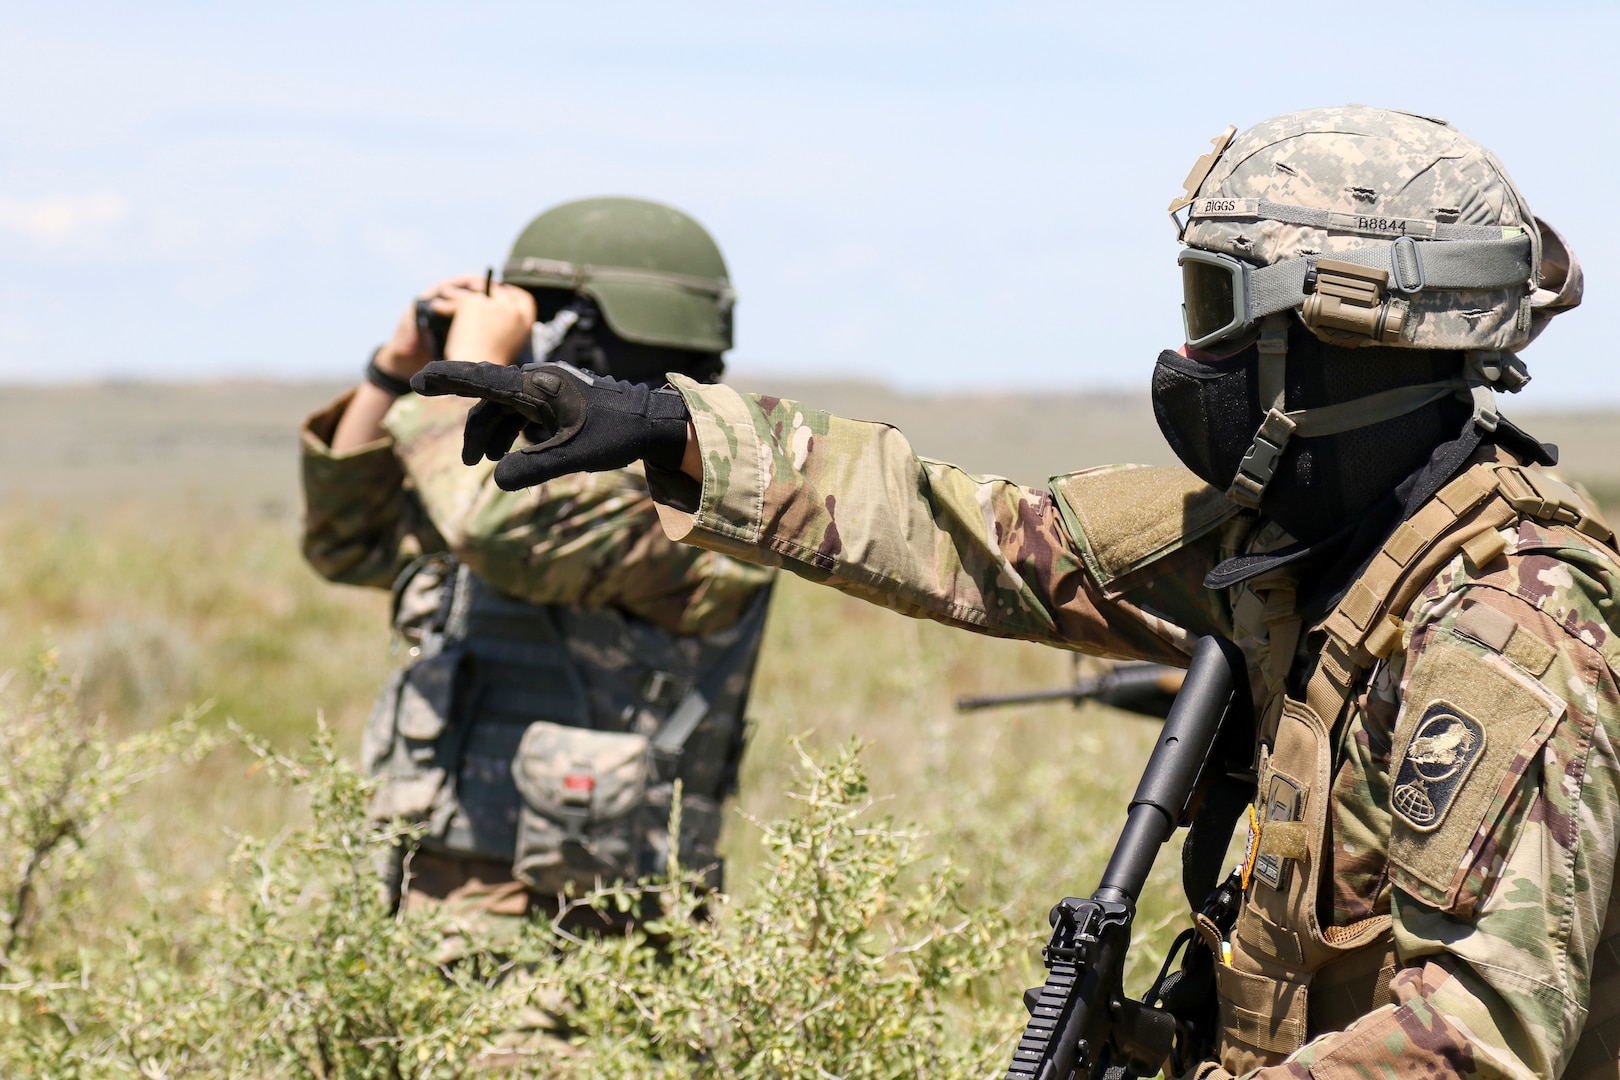 100th Missile Defense Brigade (GMD) Soldiers participate in a Situational Training Exercise at the Piñon Canyon Maneuver Site, near Trinidad, Colorado, June 13, 2019. The Soldiers conducted squad level movement, maneuver and assault operations using simulated rounds, aided by the 2-135th General Support Aviation Battalion of the Colorado Army National Guard, who provided one UH-60 Black Hawk helicopter for airlift and medevac training and operations.